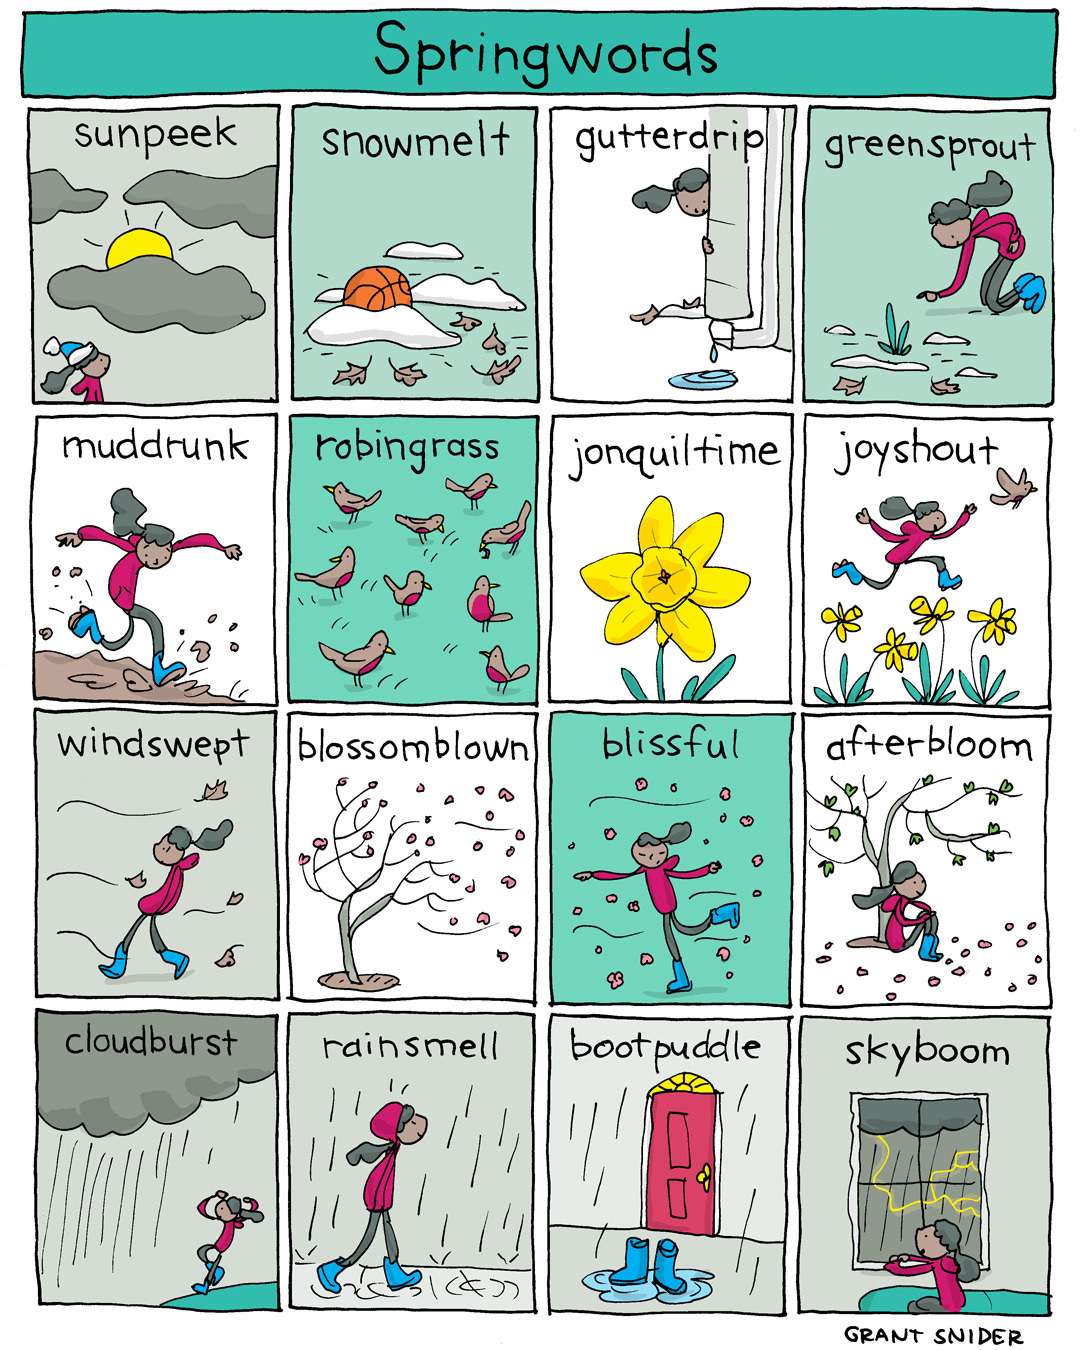 Springwords
Happy National Poetry Month! Join me throughout April as I post a brand new series of poetry comics. Because what could be better than comics, poems, and Spring?